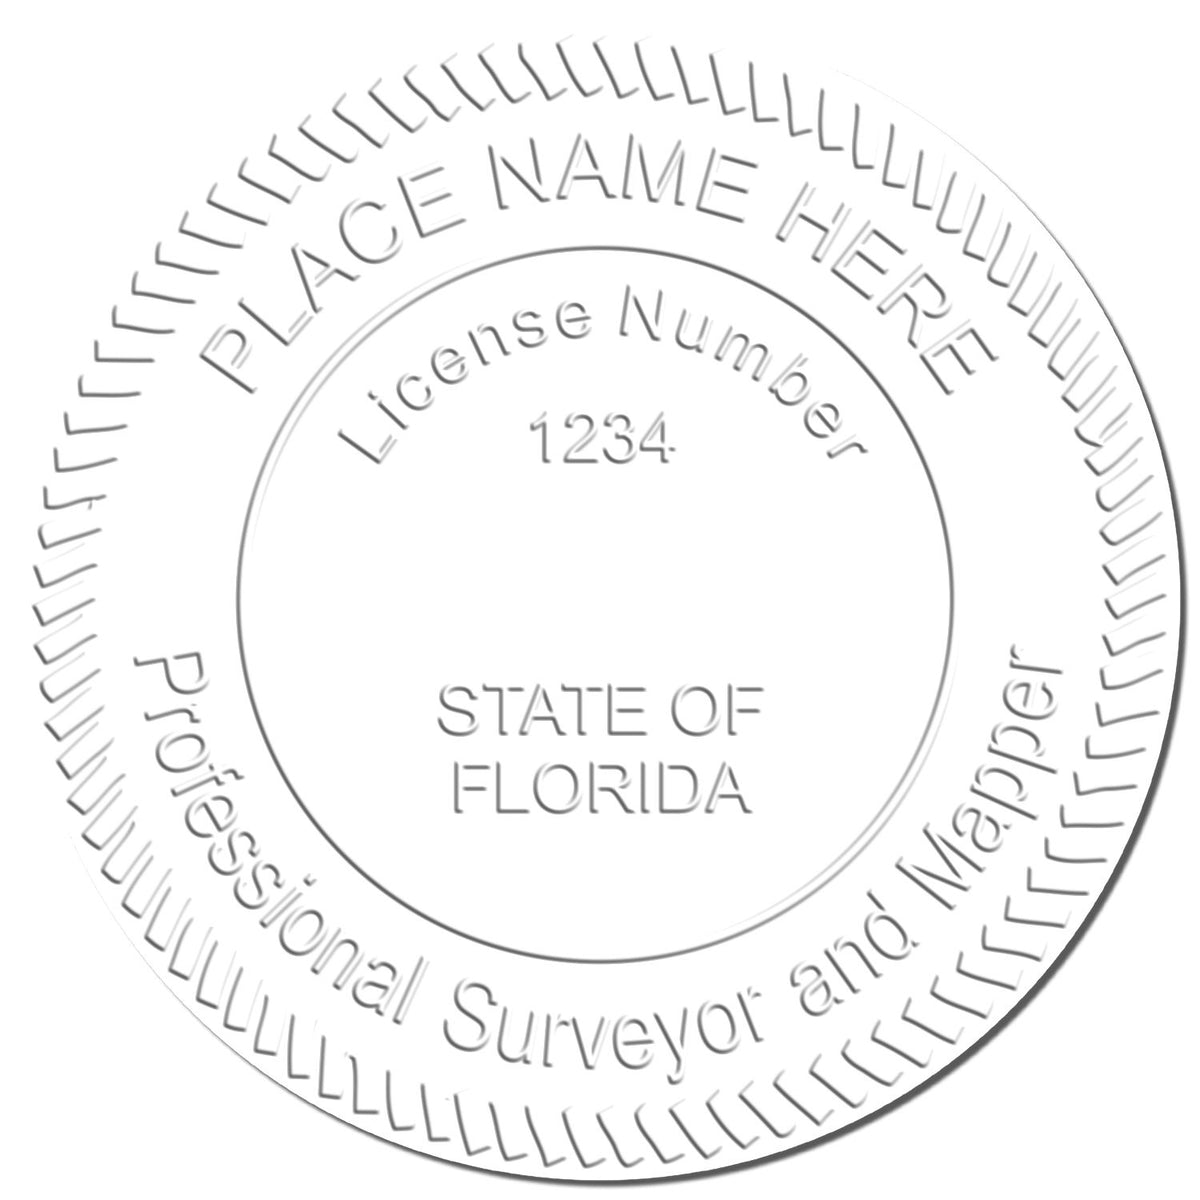 This paper is stamped with a sample imprint of the Extended Long Reach Florida Surveyor Embosser, signifying its quality and reliability.